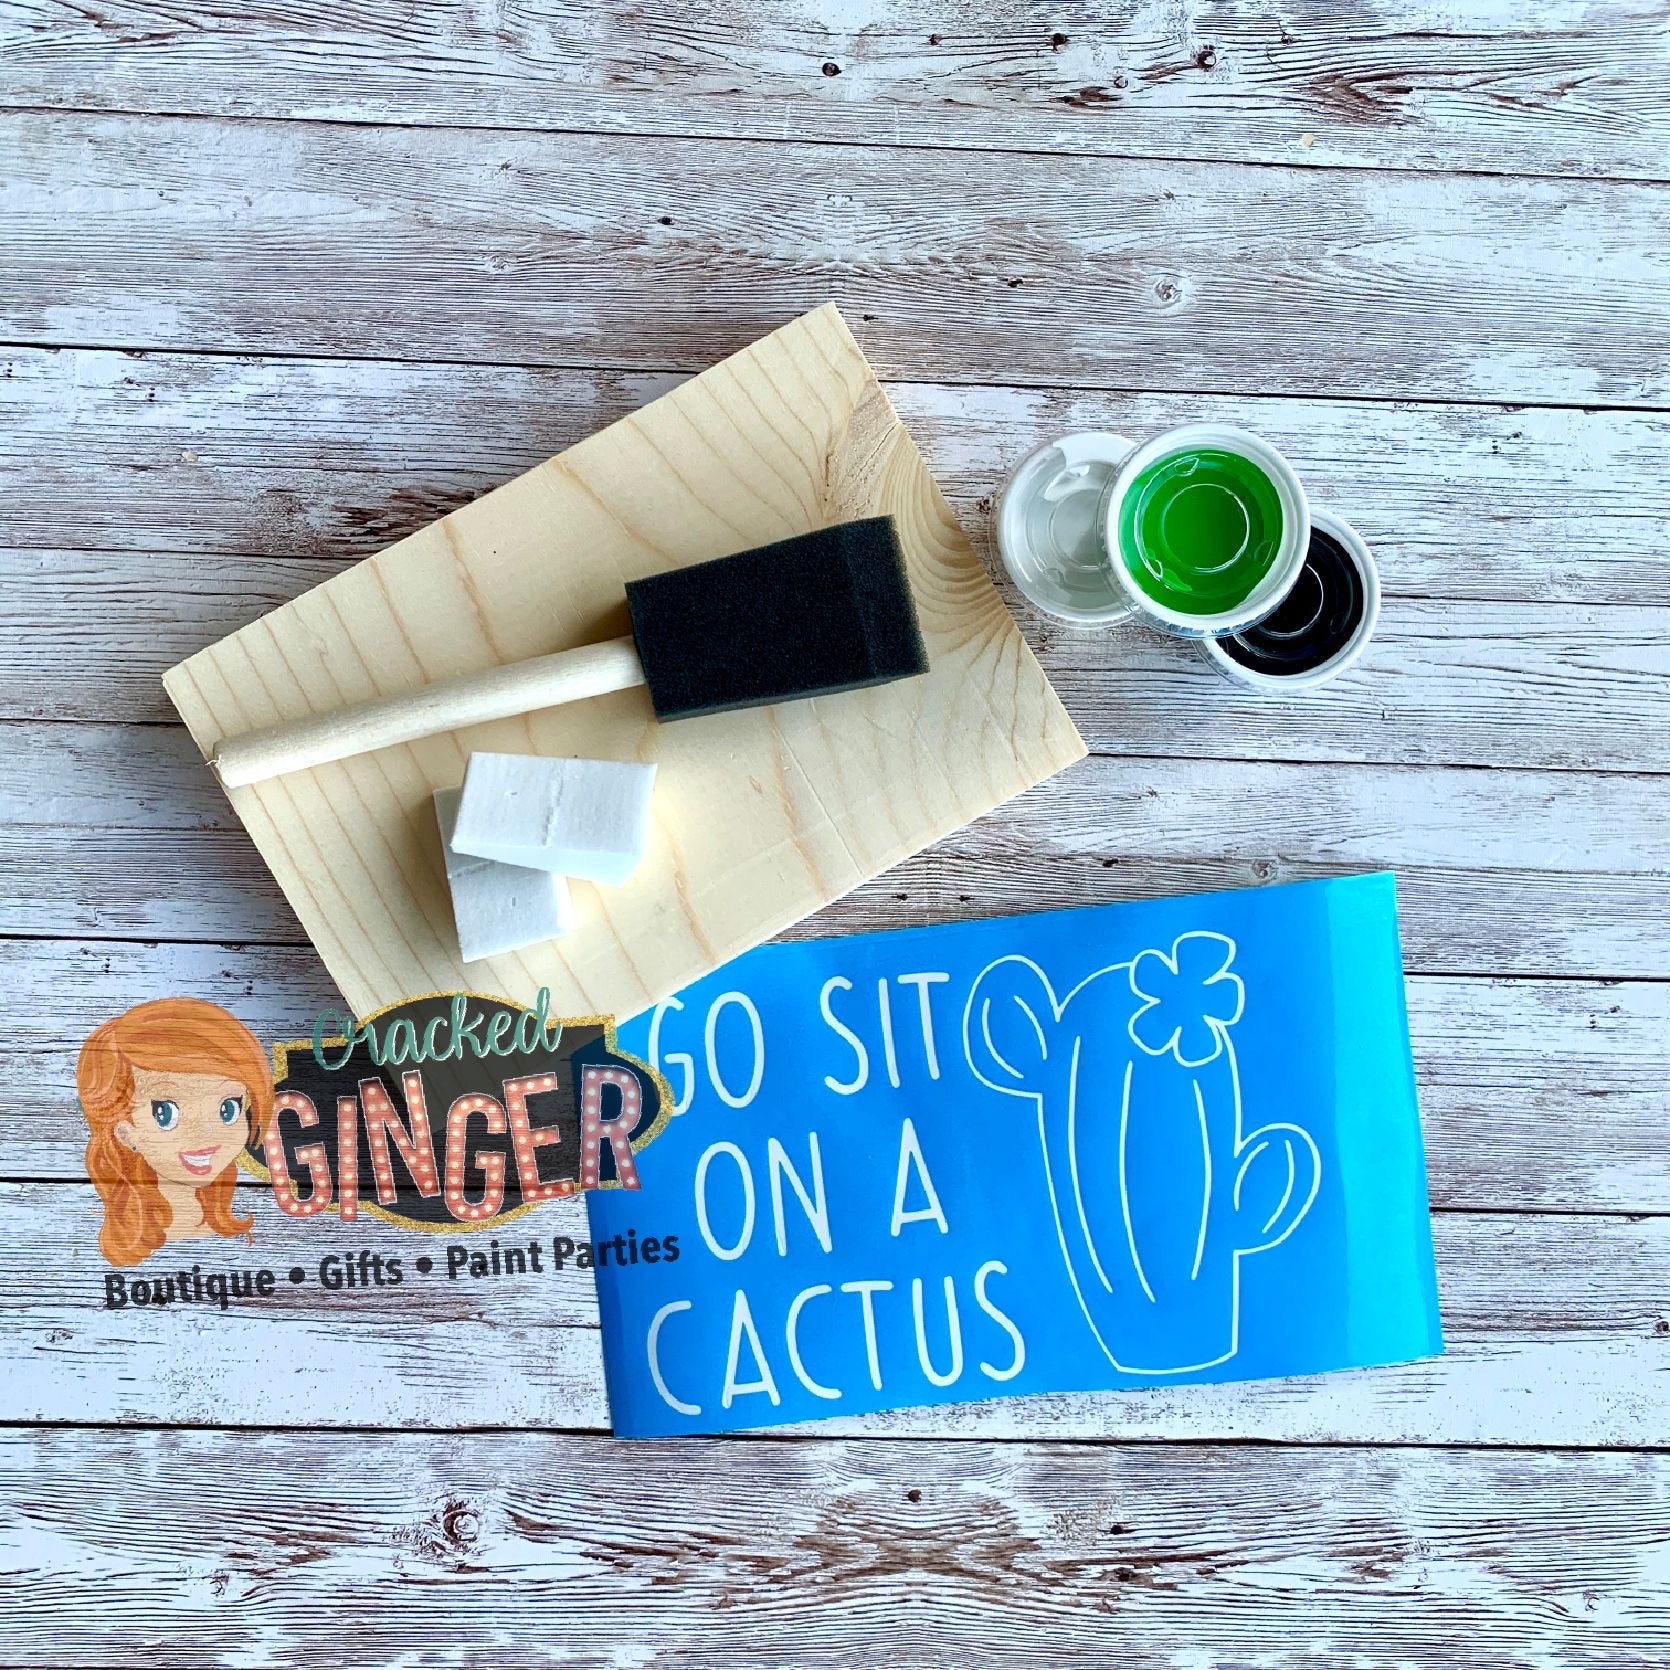 Sit on a cactus stencil sign board paint kit